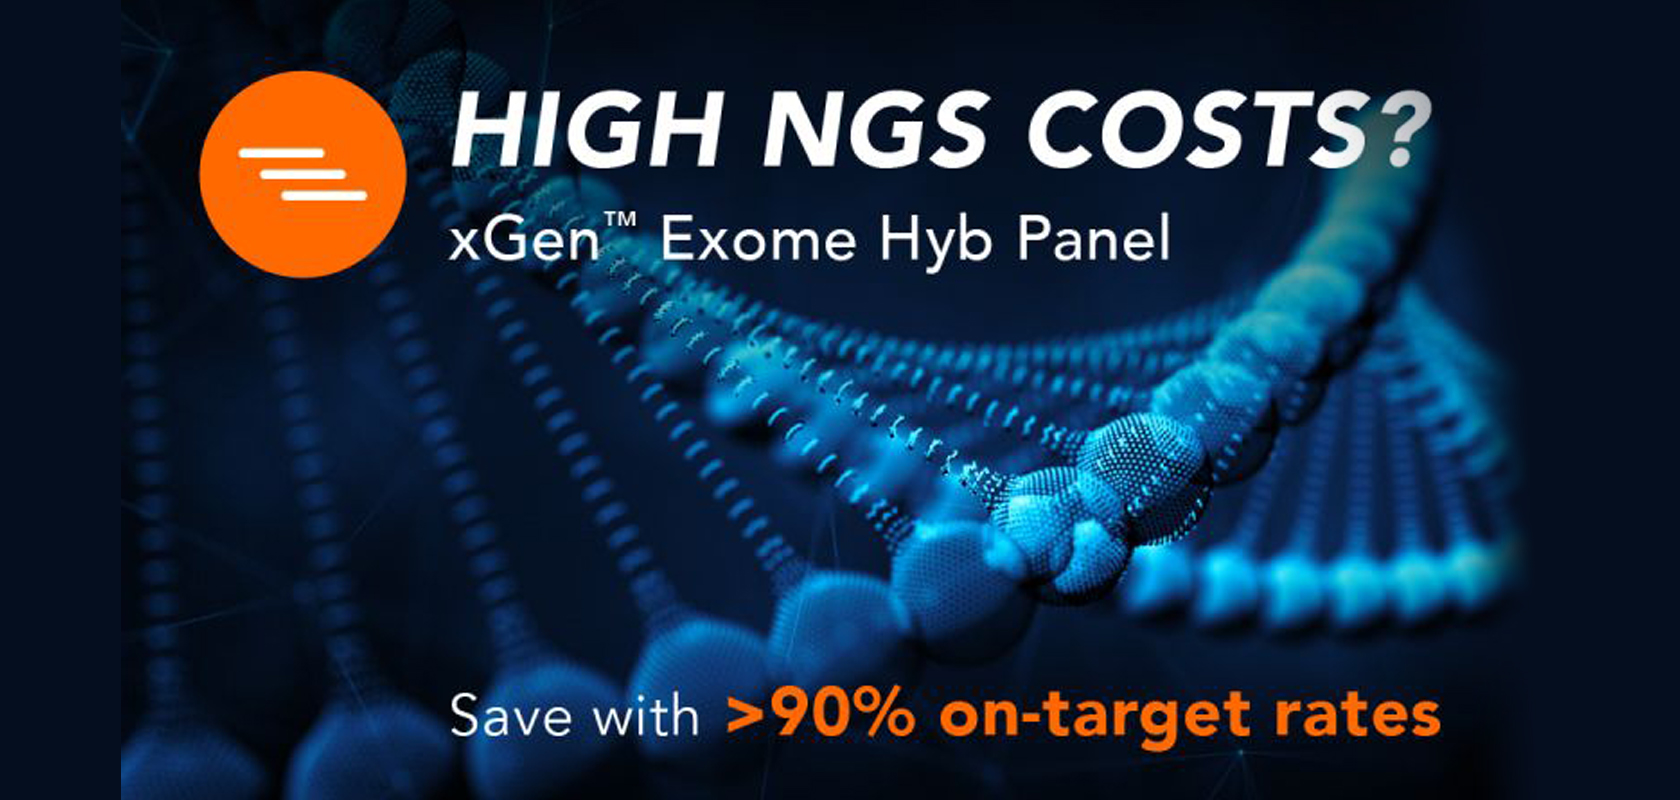 HIGH NGS COSTS?